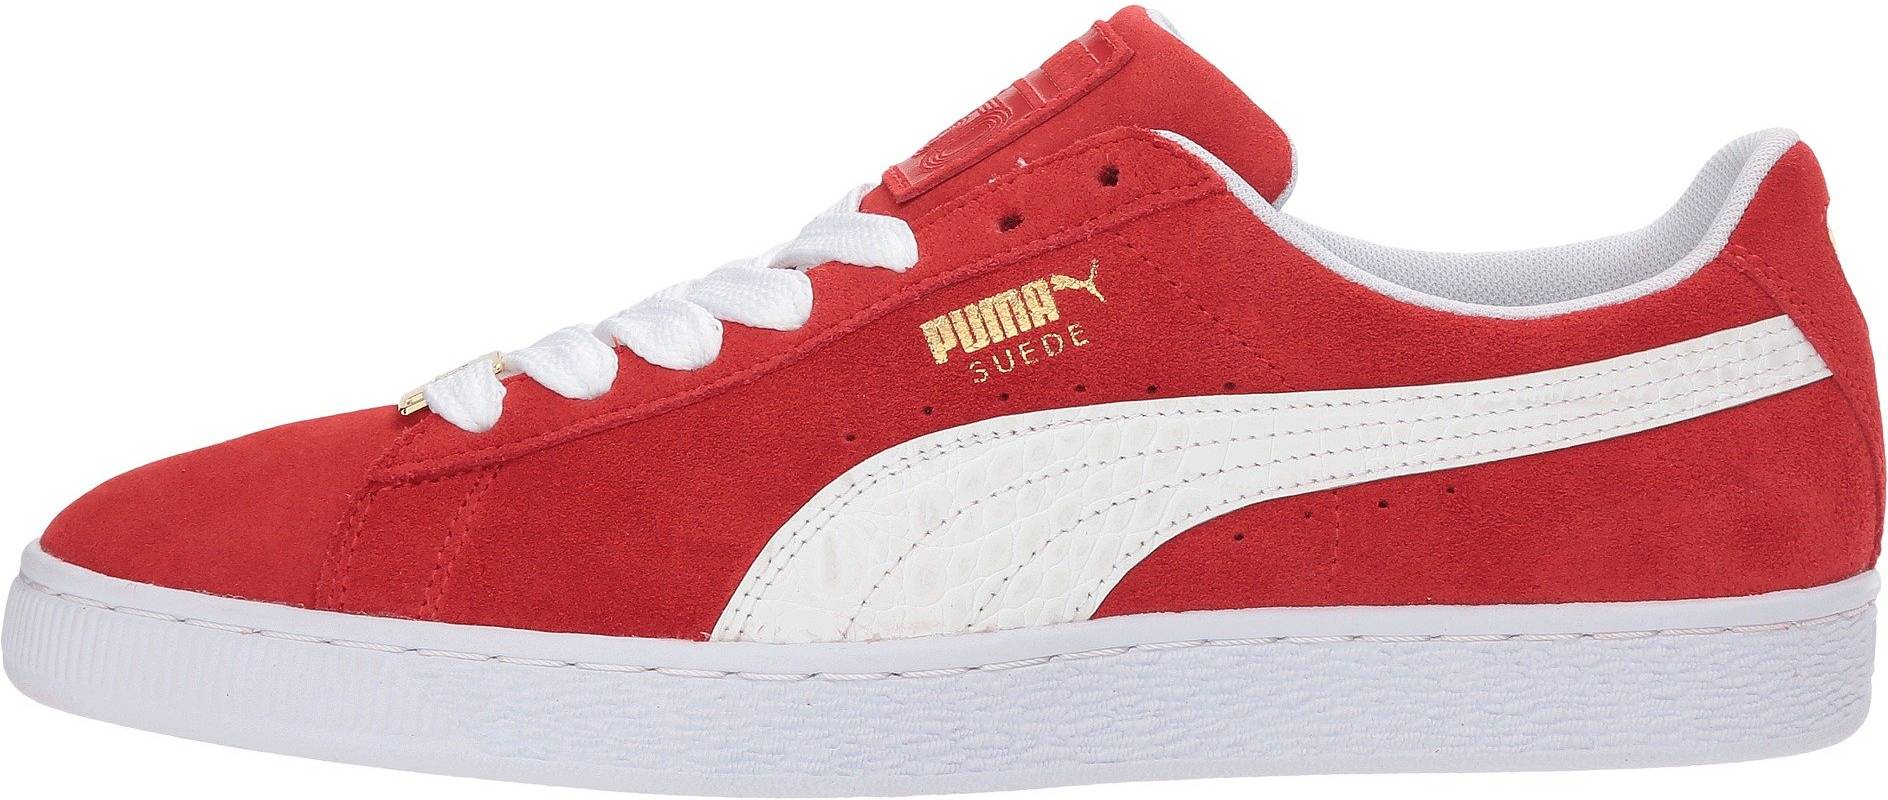 Puma Suede Classic B-BOY sneakers in red (only $27) | RunRepeat